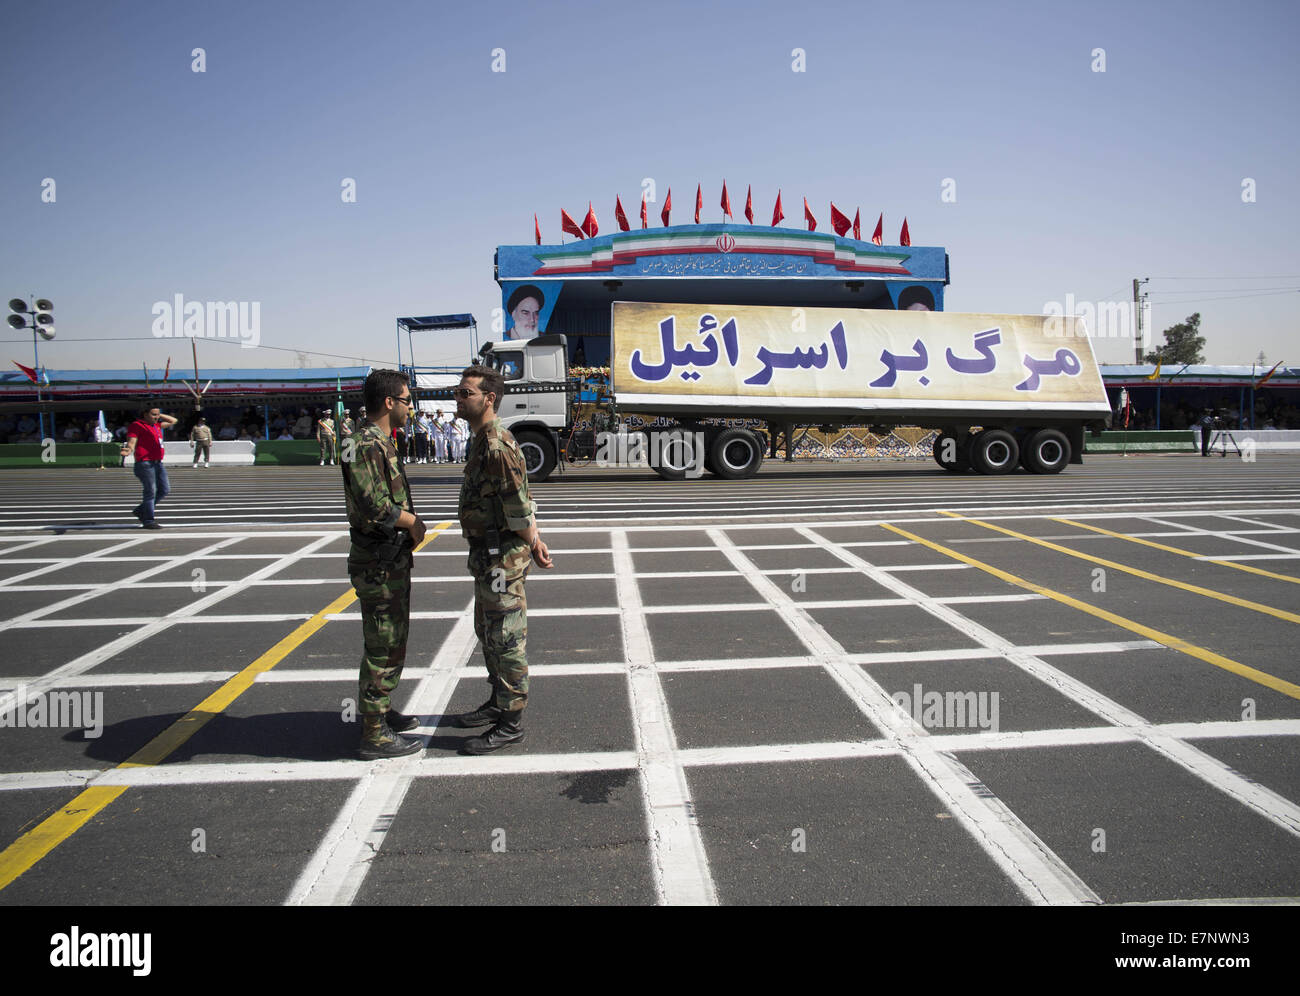 Tehran, Iran. 22nd Sep, 2014. September 22, 2014 - Tehran, Iran - Two members of Iran's Revolutionary guard talk to each other as a vehicle carrying an anti-Israel banner during a military parade to commemorate the anniversary of the Iran-Iraq war (1980-88) in Tehran. Banner said, Down with Israel. Morteza Nikoubazl/ZUMAPRESS Credit:  Morteza Nikoubazl/ZUMA Wire/Alamy Live News Stock Photo